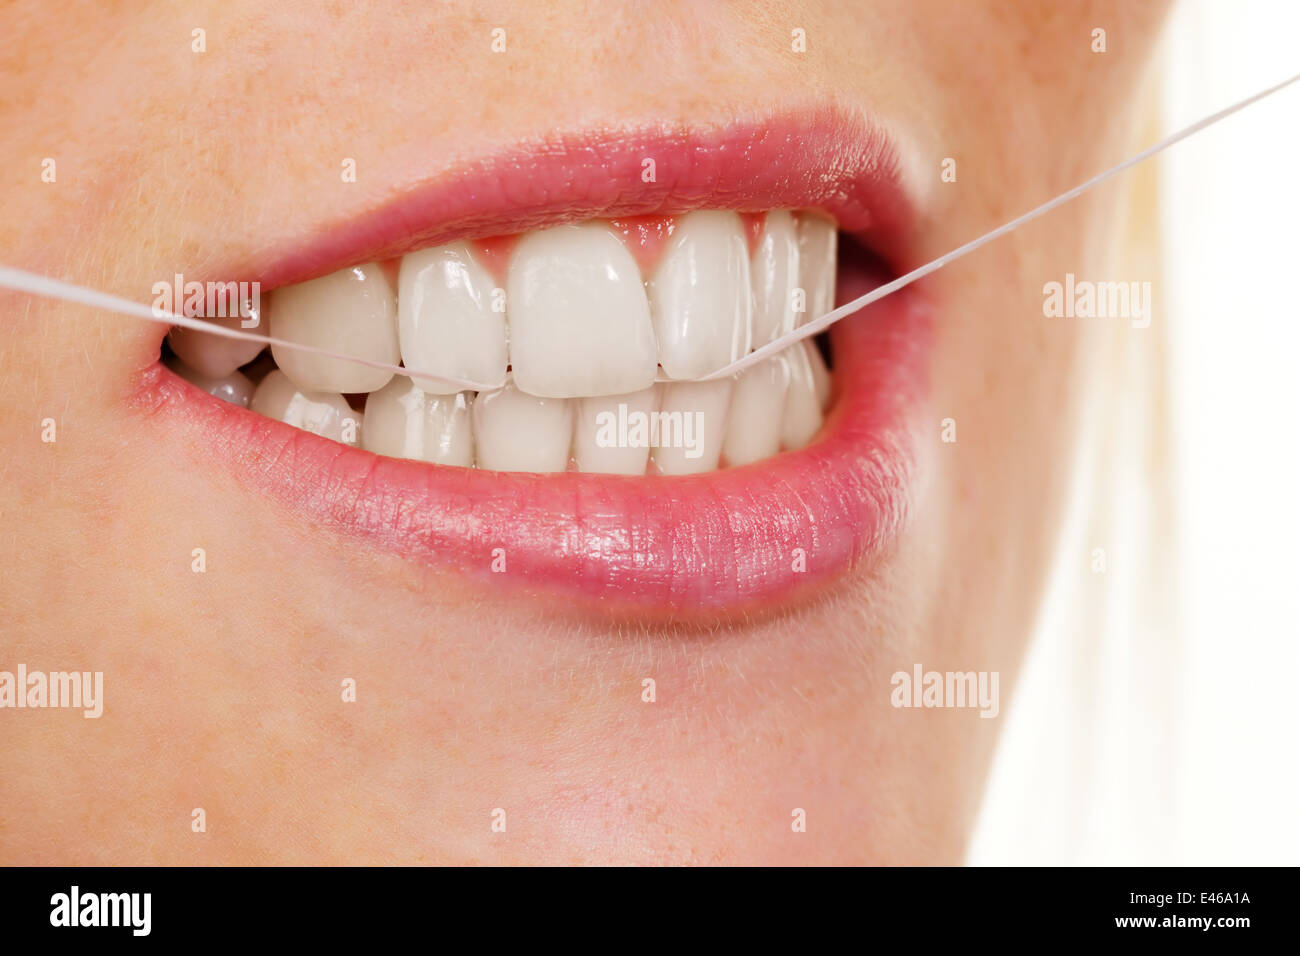 A young woman uses dental floss to clean her teeth Stock Photo